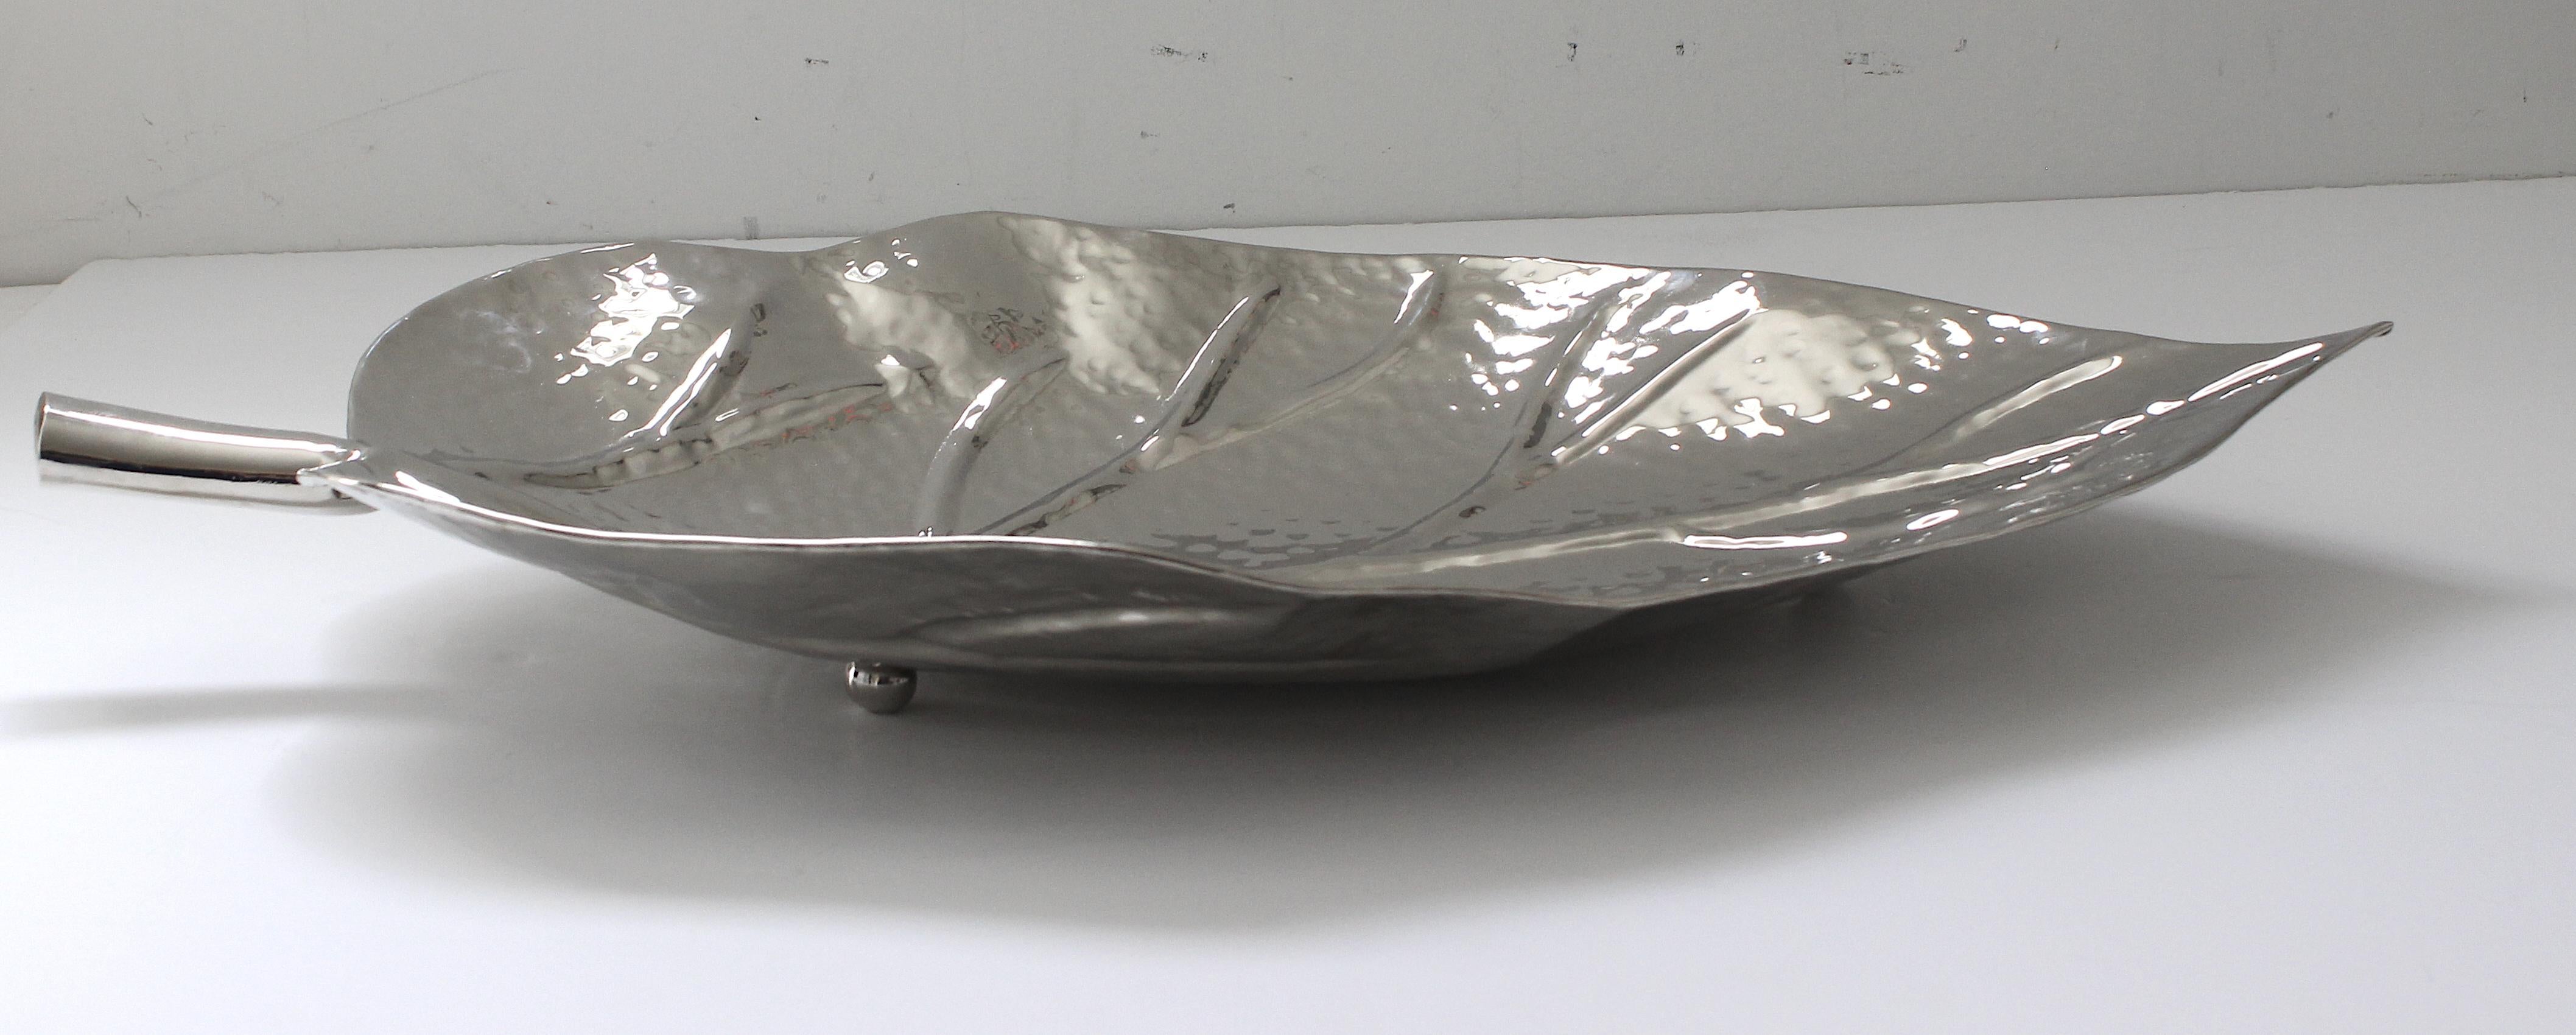 Nickel Plated Leaf Form Serving Tray by Iconic Snob Galeries For Sale 3